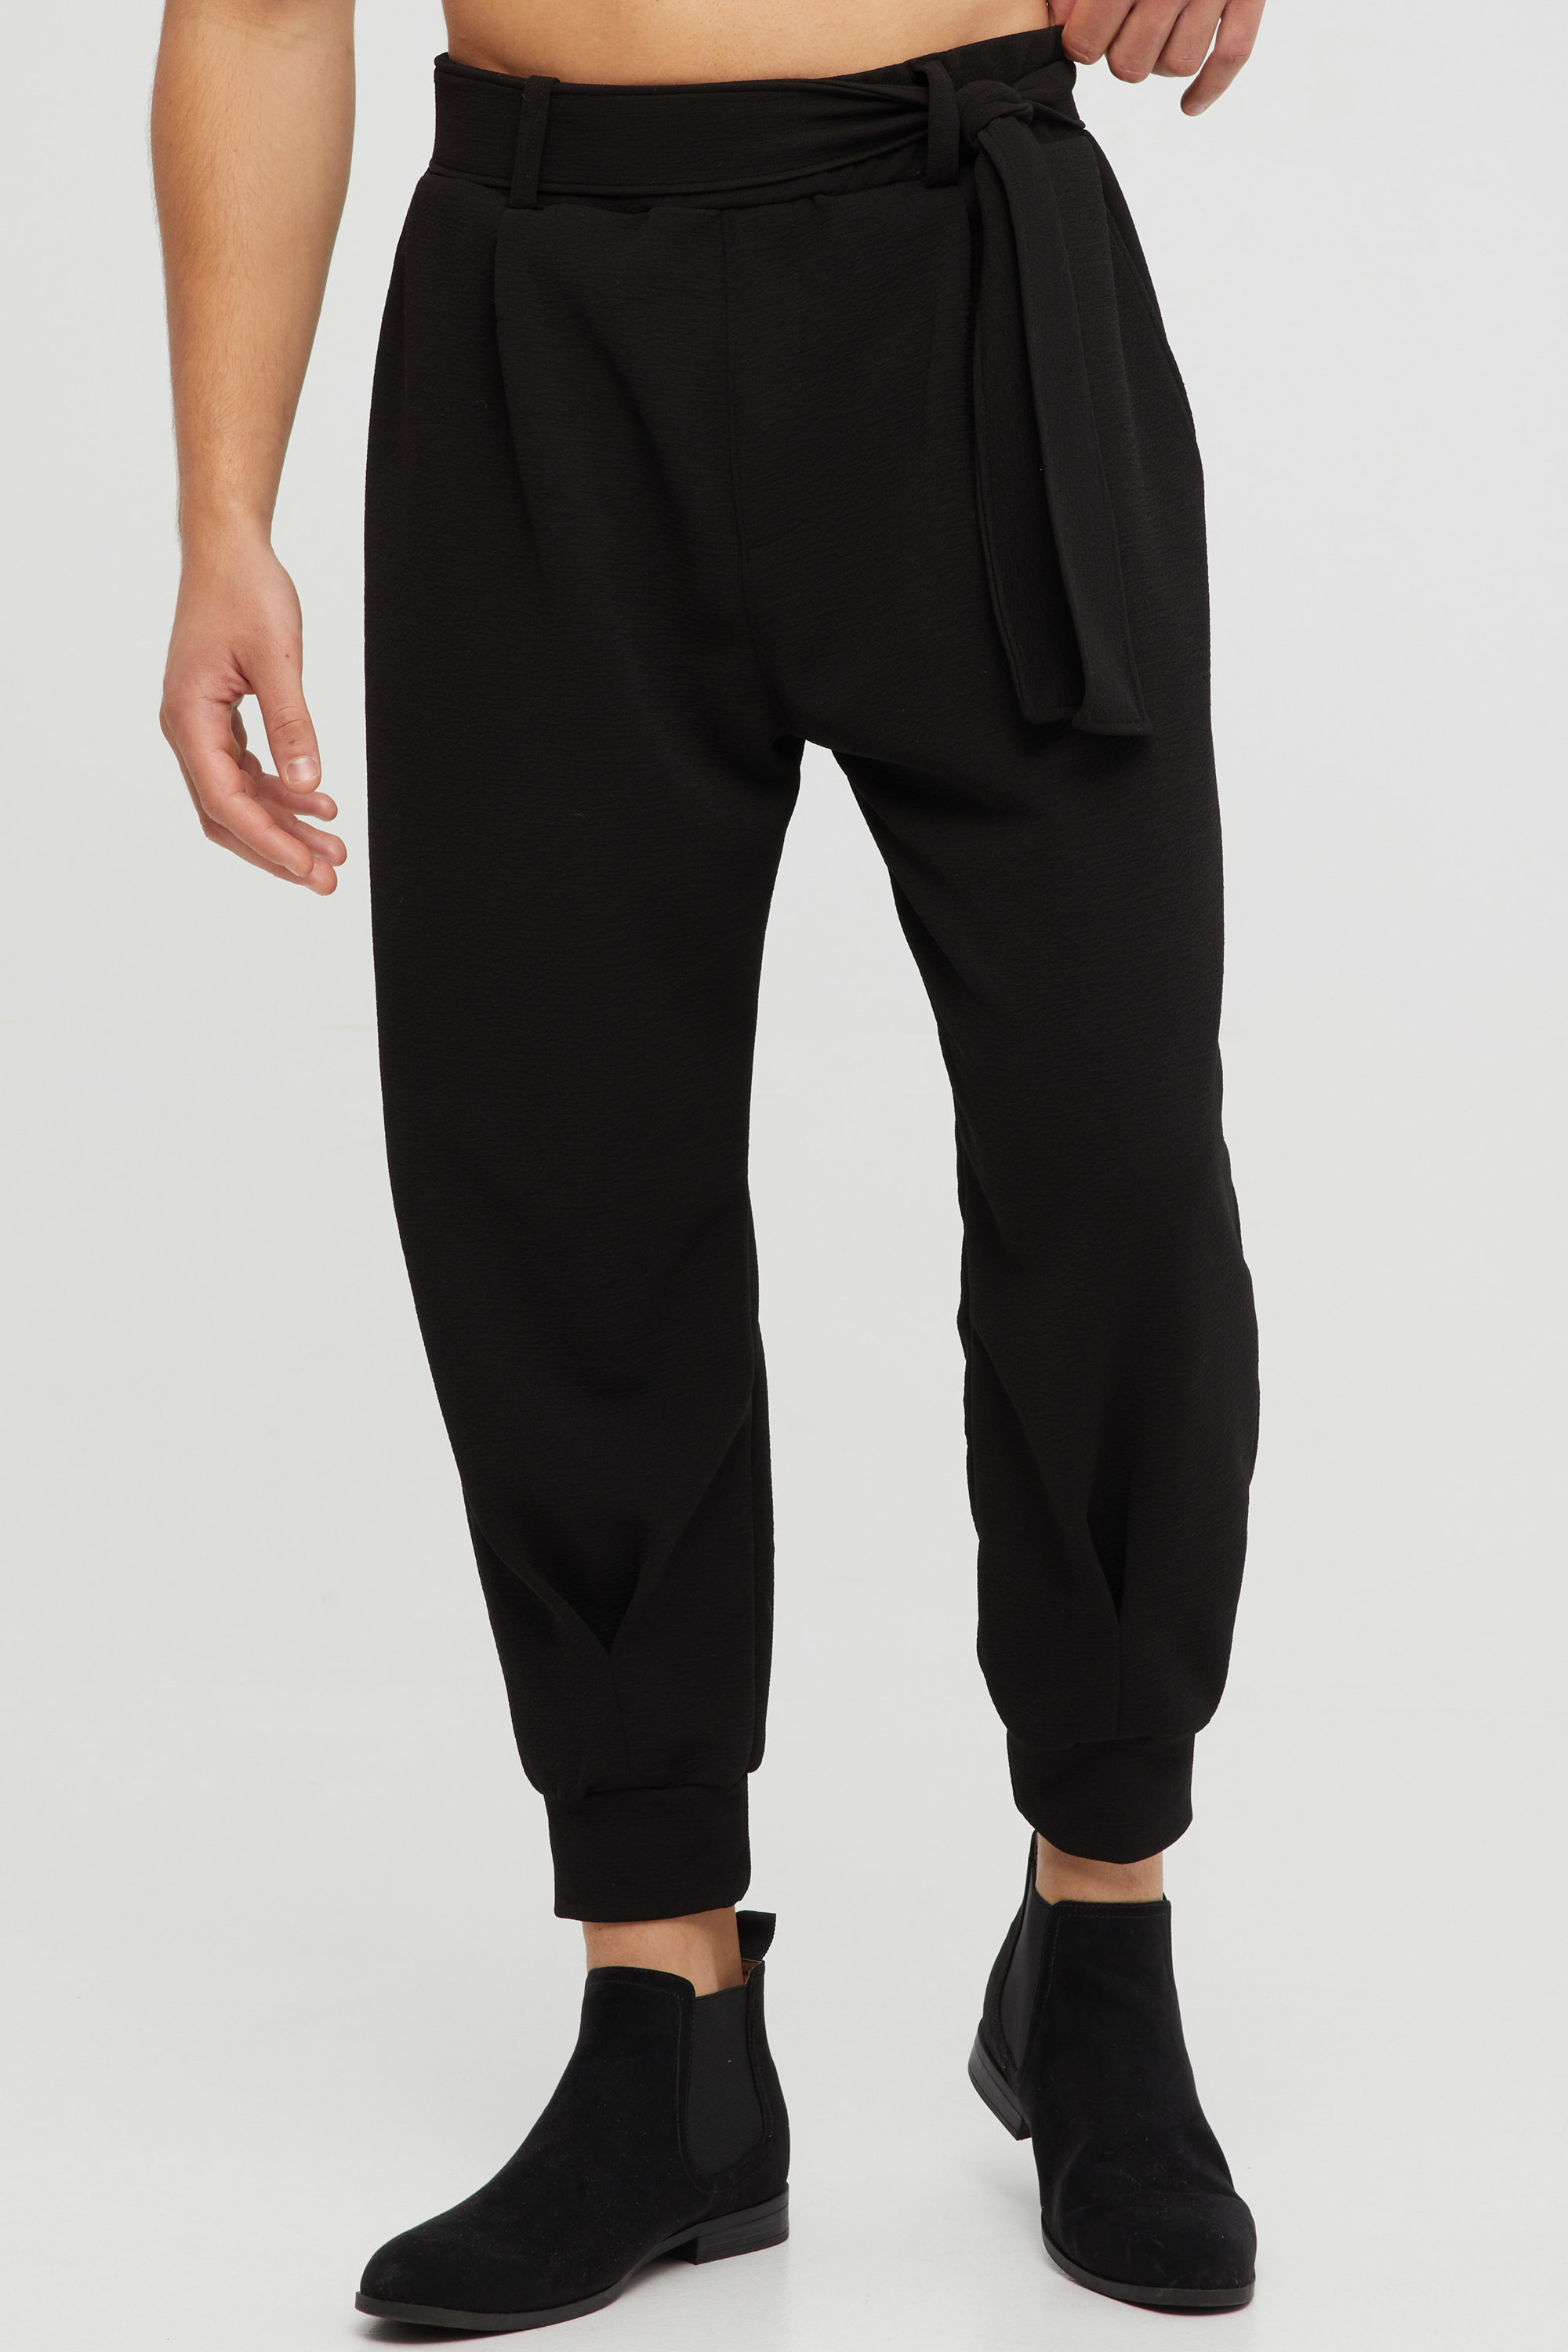 Black Trousers With Attached Belt And Cuffs In Relaxed Fit | Aristoteli ...